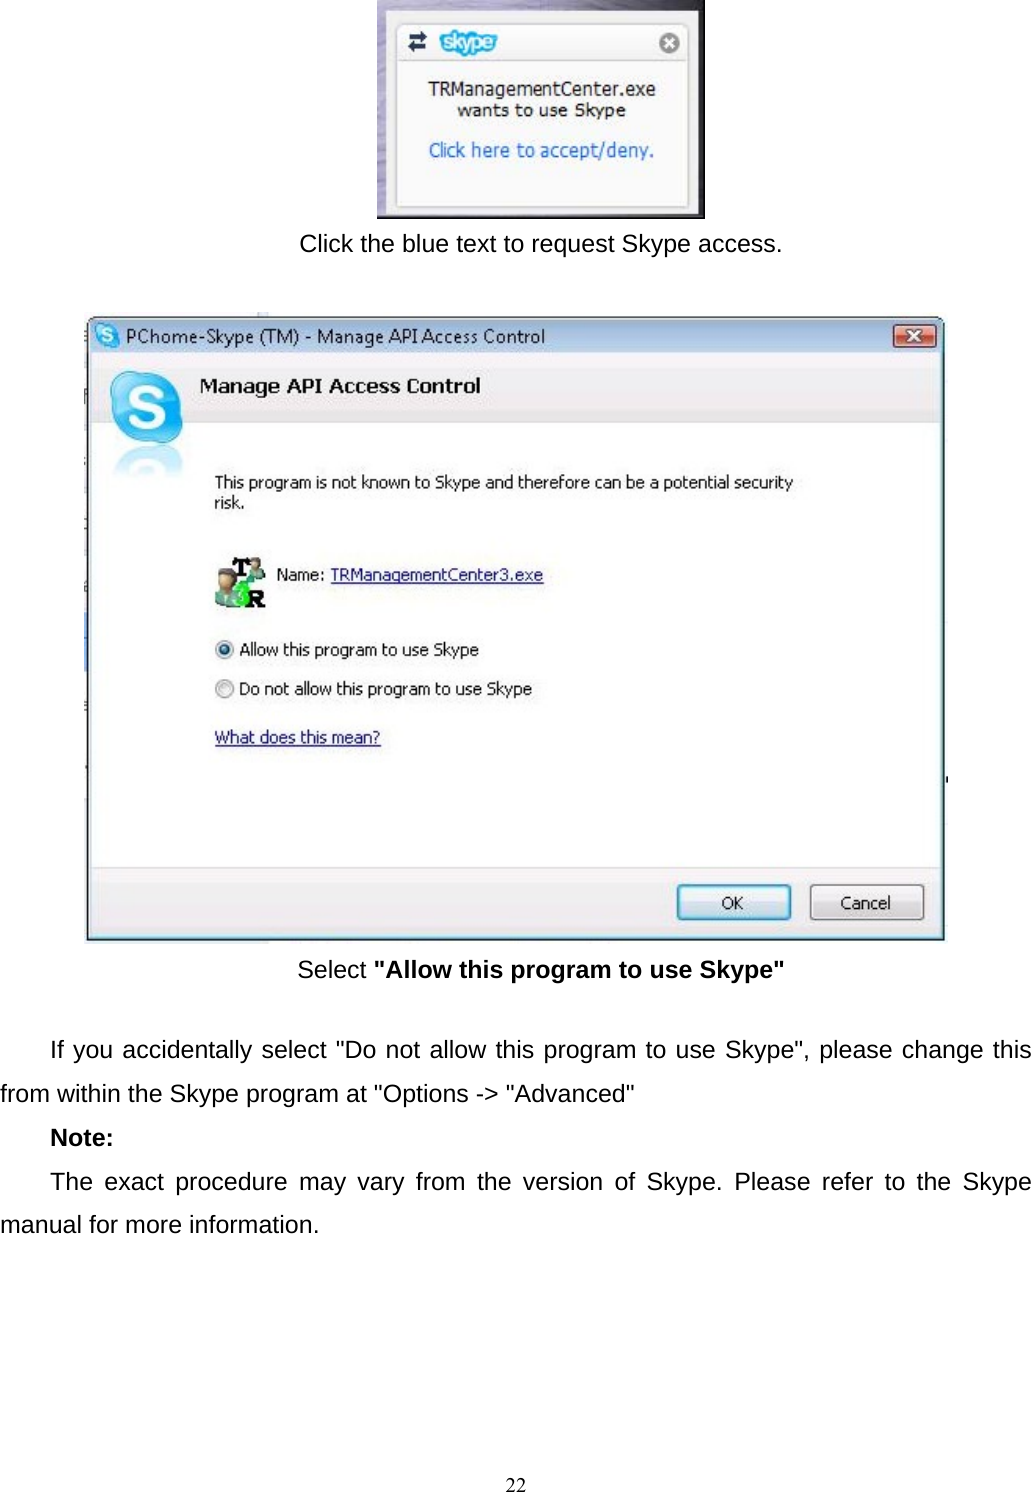  Click the blue text to request Skype access.   Select &quot;Allow this program to use Skype&quot;  If you accidentally select &quot;Do not allow this program to use Skype&quot;, please change this from within the Skype program at &quot;Options -&gt; &quot;Advanced&quot;   Note:  The exact procedure may vary from the version of Skype. Please refer to the Skype manual for more information.         22